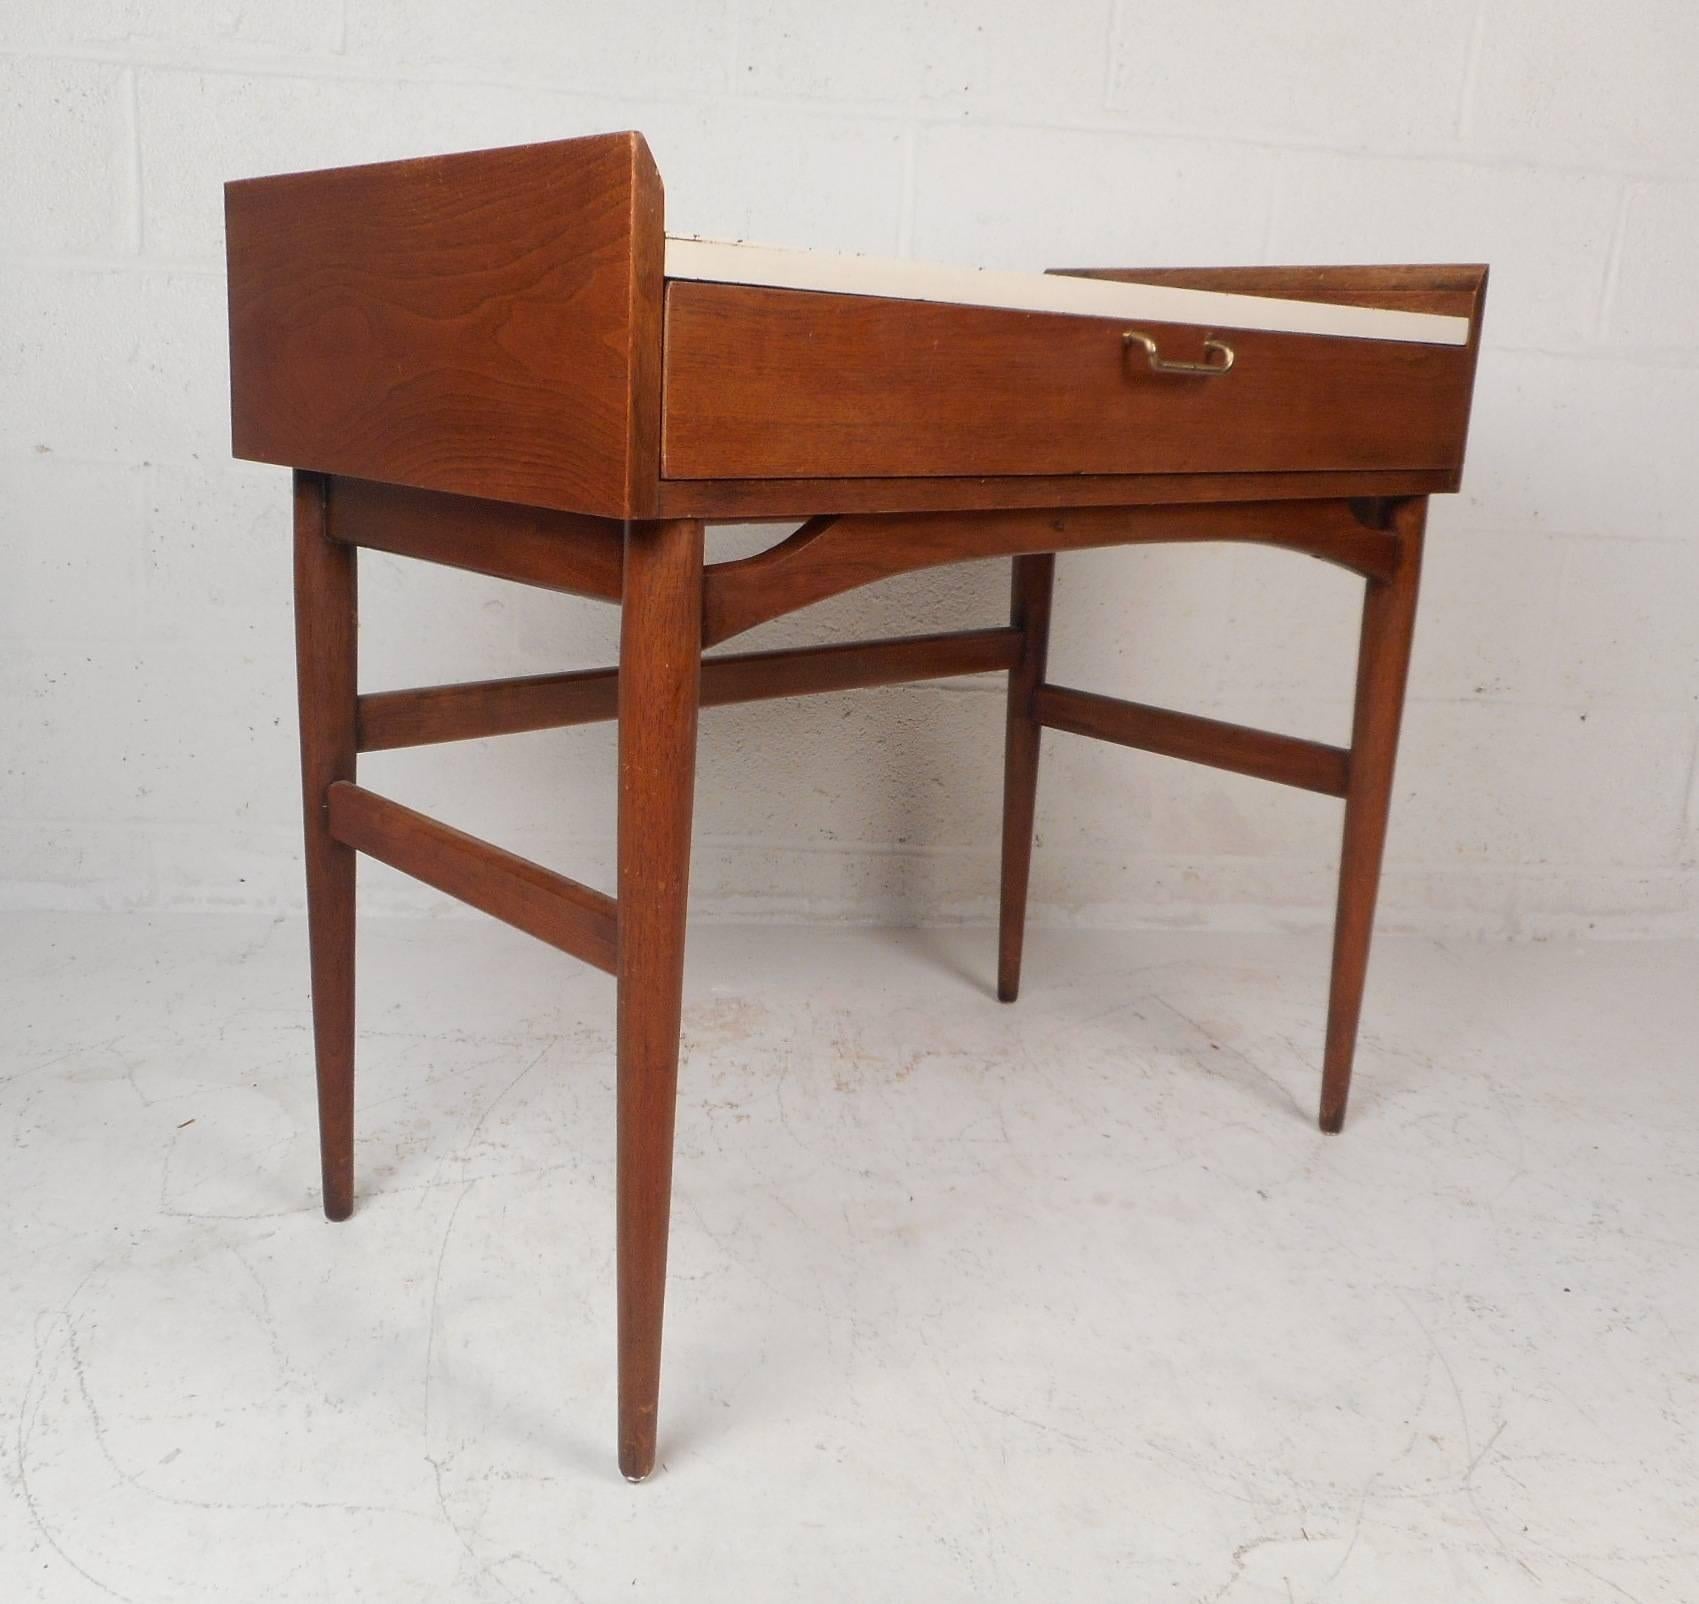 This beautiful vintage modern vanity features one drawer with a unique brass pull and slender tapered legs. Sleek design with raised and beveled wood edges surrounding the stylish white formica top. Quality construction with stretchers running to